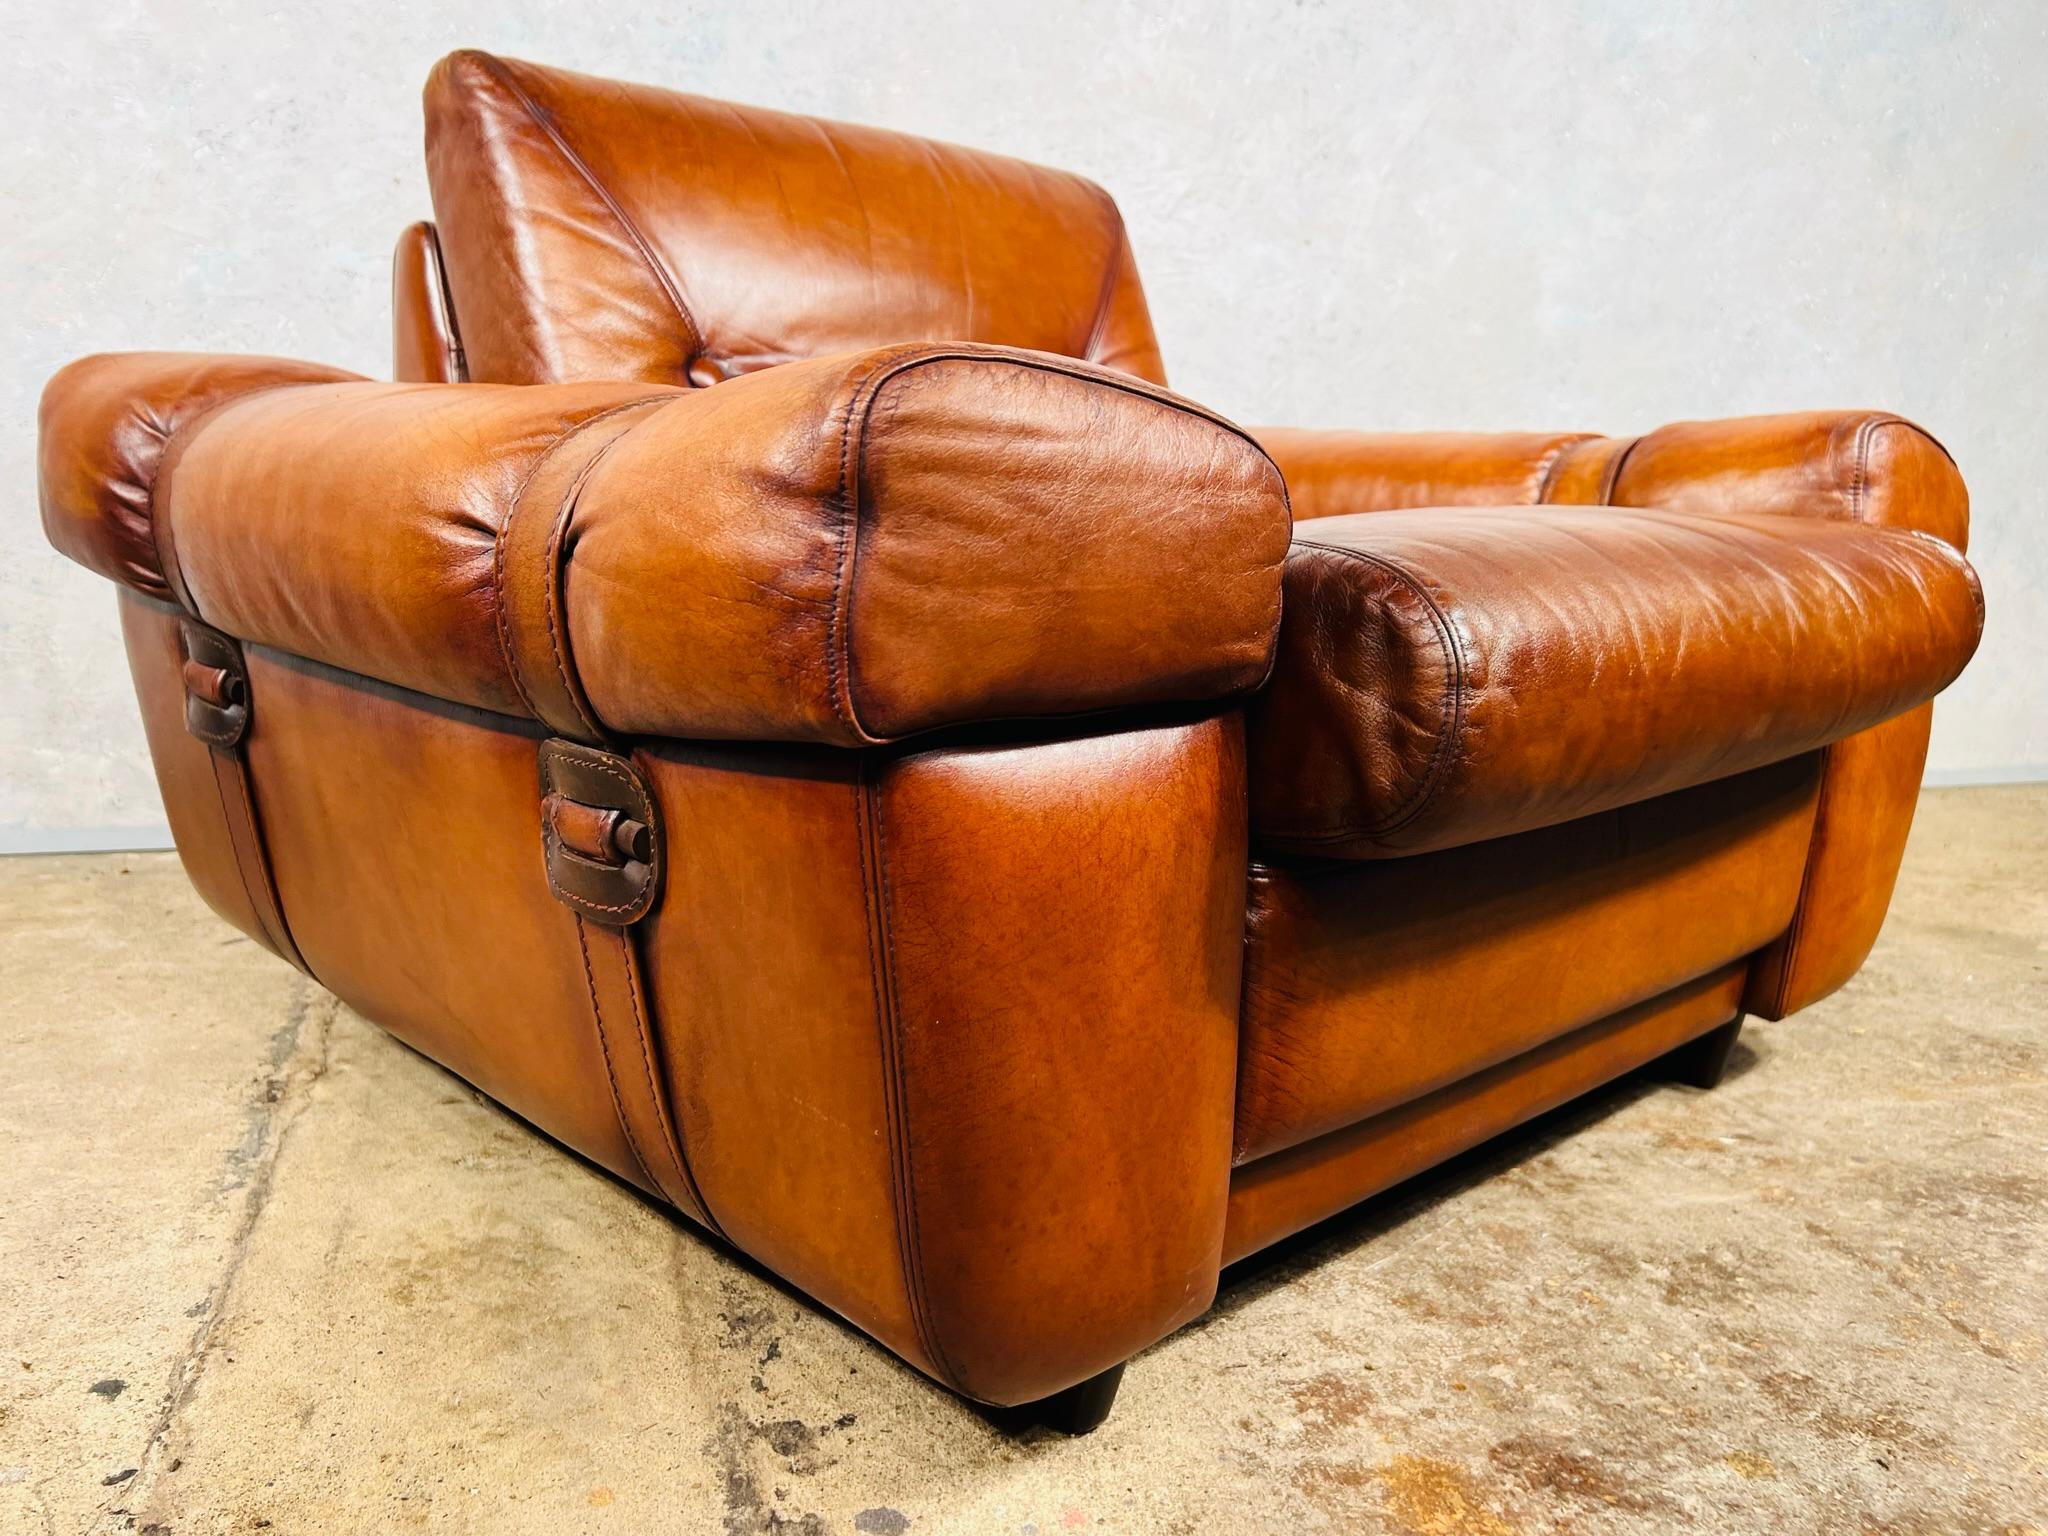 Vintage 1970s Svend Skipper Leather Light Tan Armchair with Buckles #658 For Sale 8